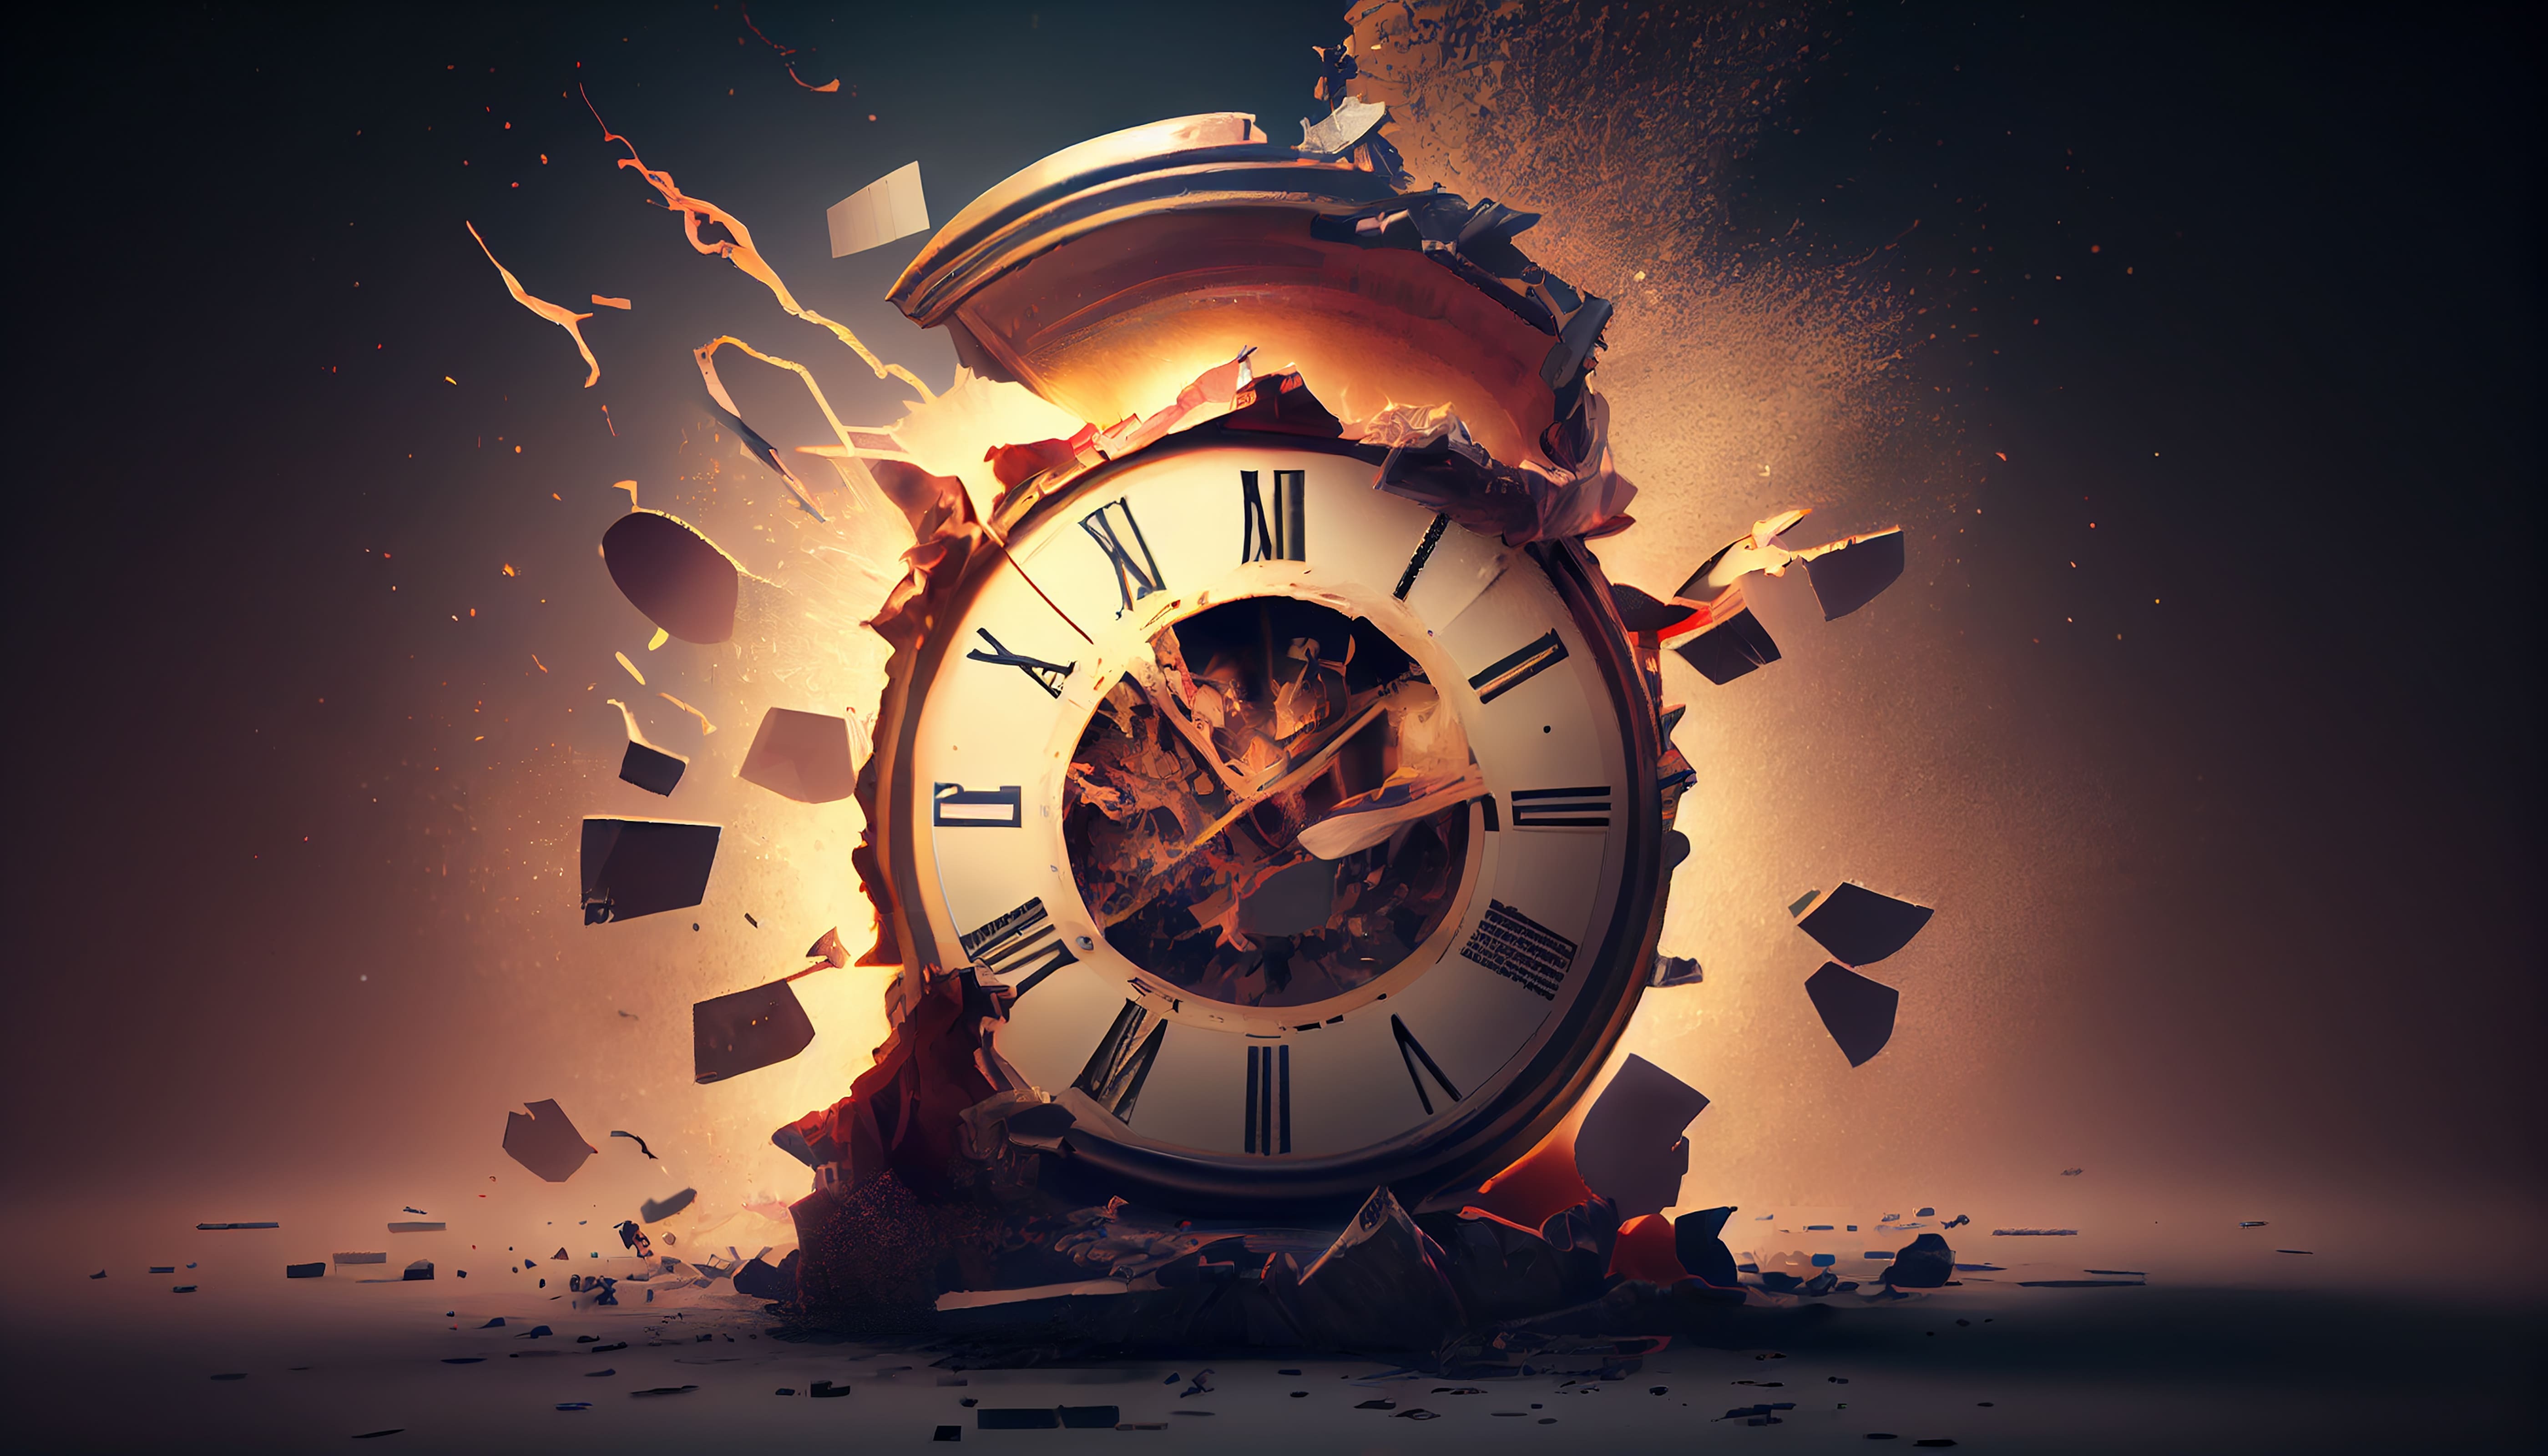 An explosive moment captured: shattered remnants of time float amidst a dynamic burst from a classic clock, symbolizing possibly the concept of time running out or a significant disruption in the continuum.